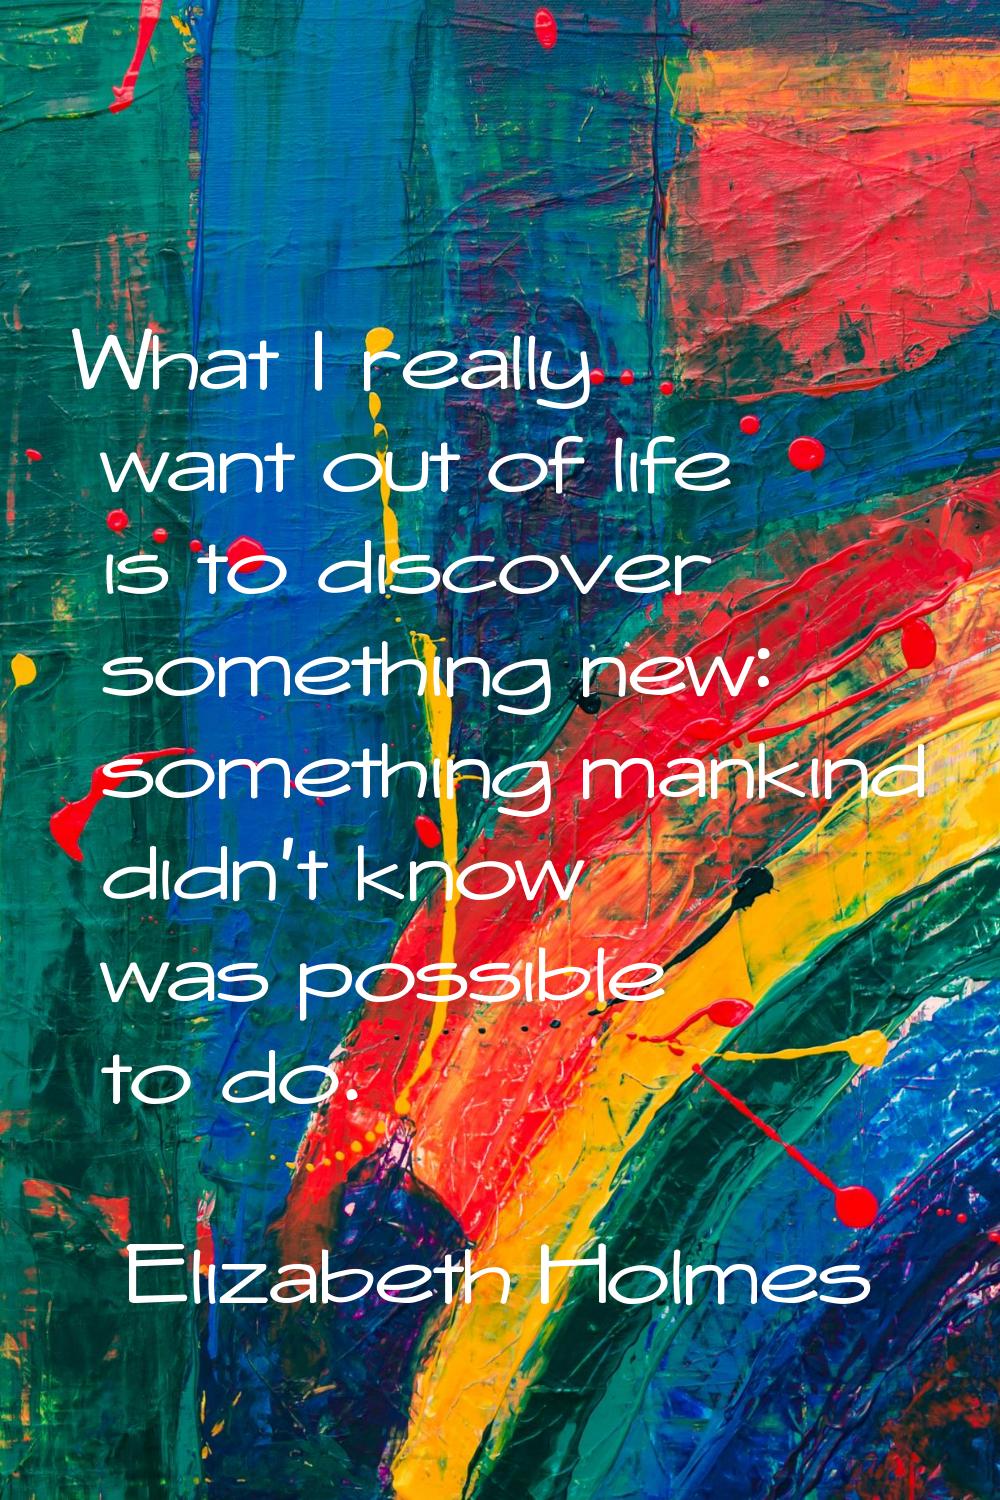 What I really want out of life is to discover something new: something mankind didn't know was poss